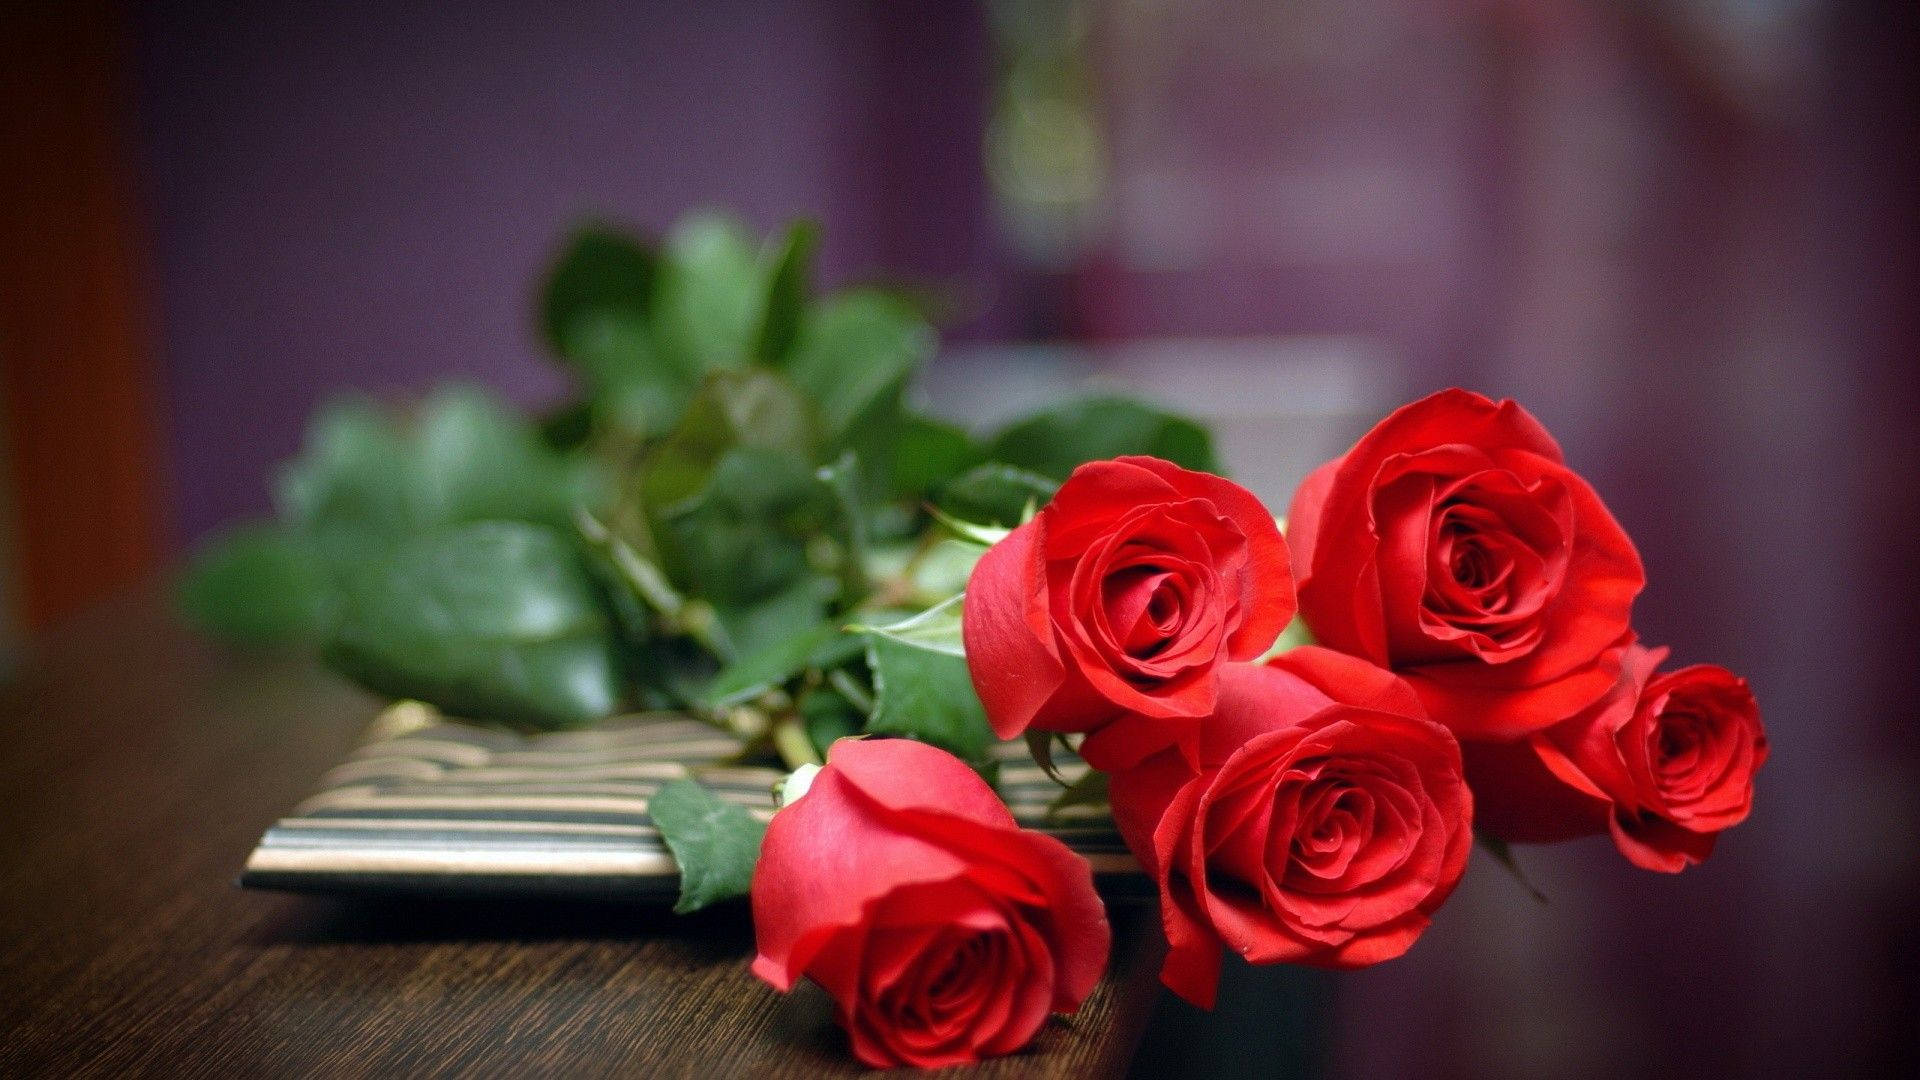 Red Roses On A Table Background